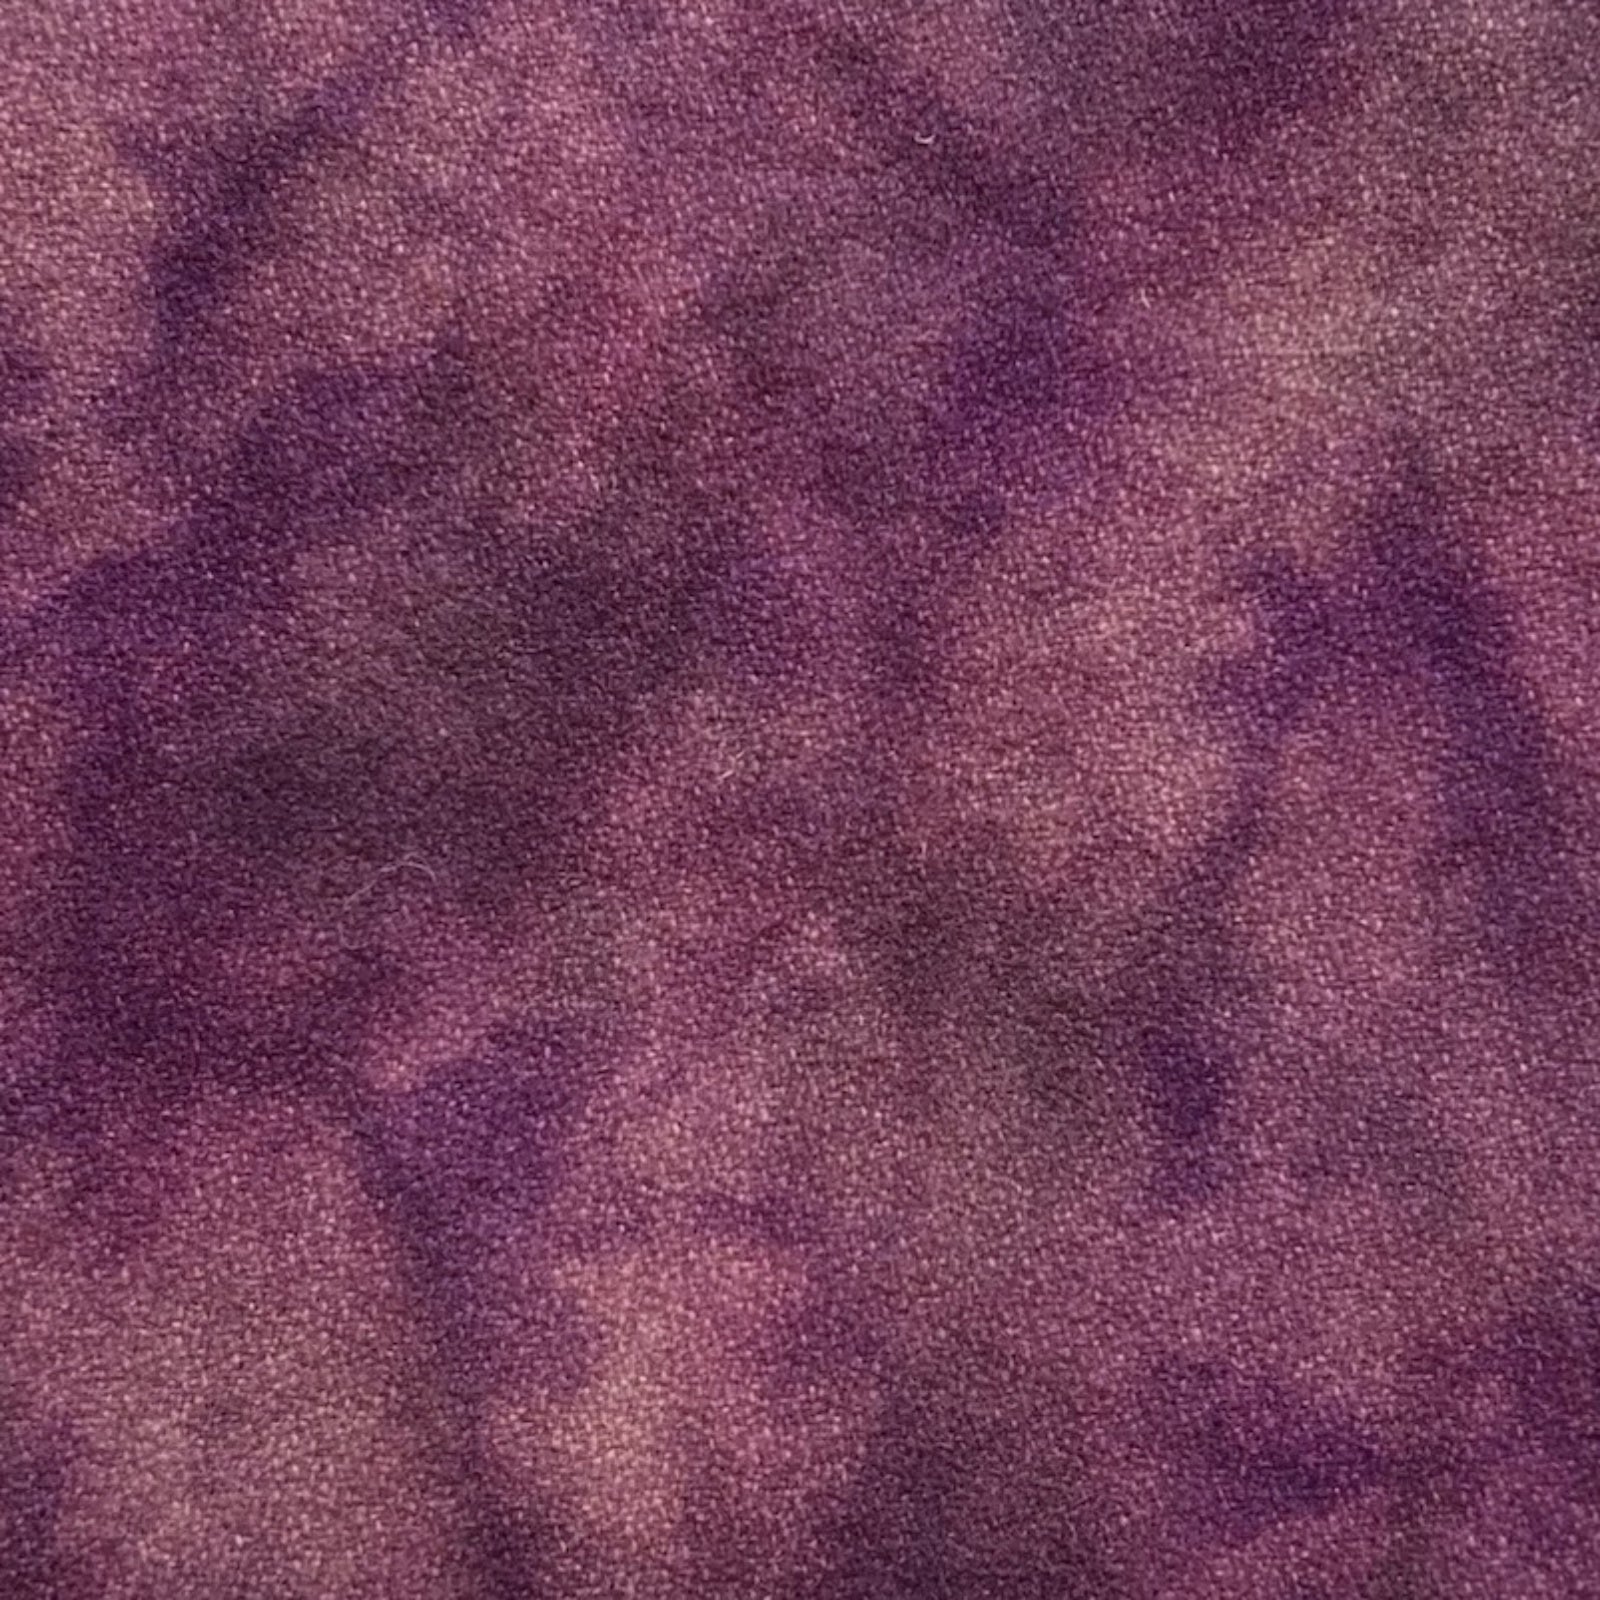 Lupine - Colorama Hand Dyed Wool - Offered by HoneyBee Hive Rug Hooking